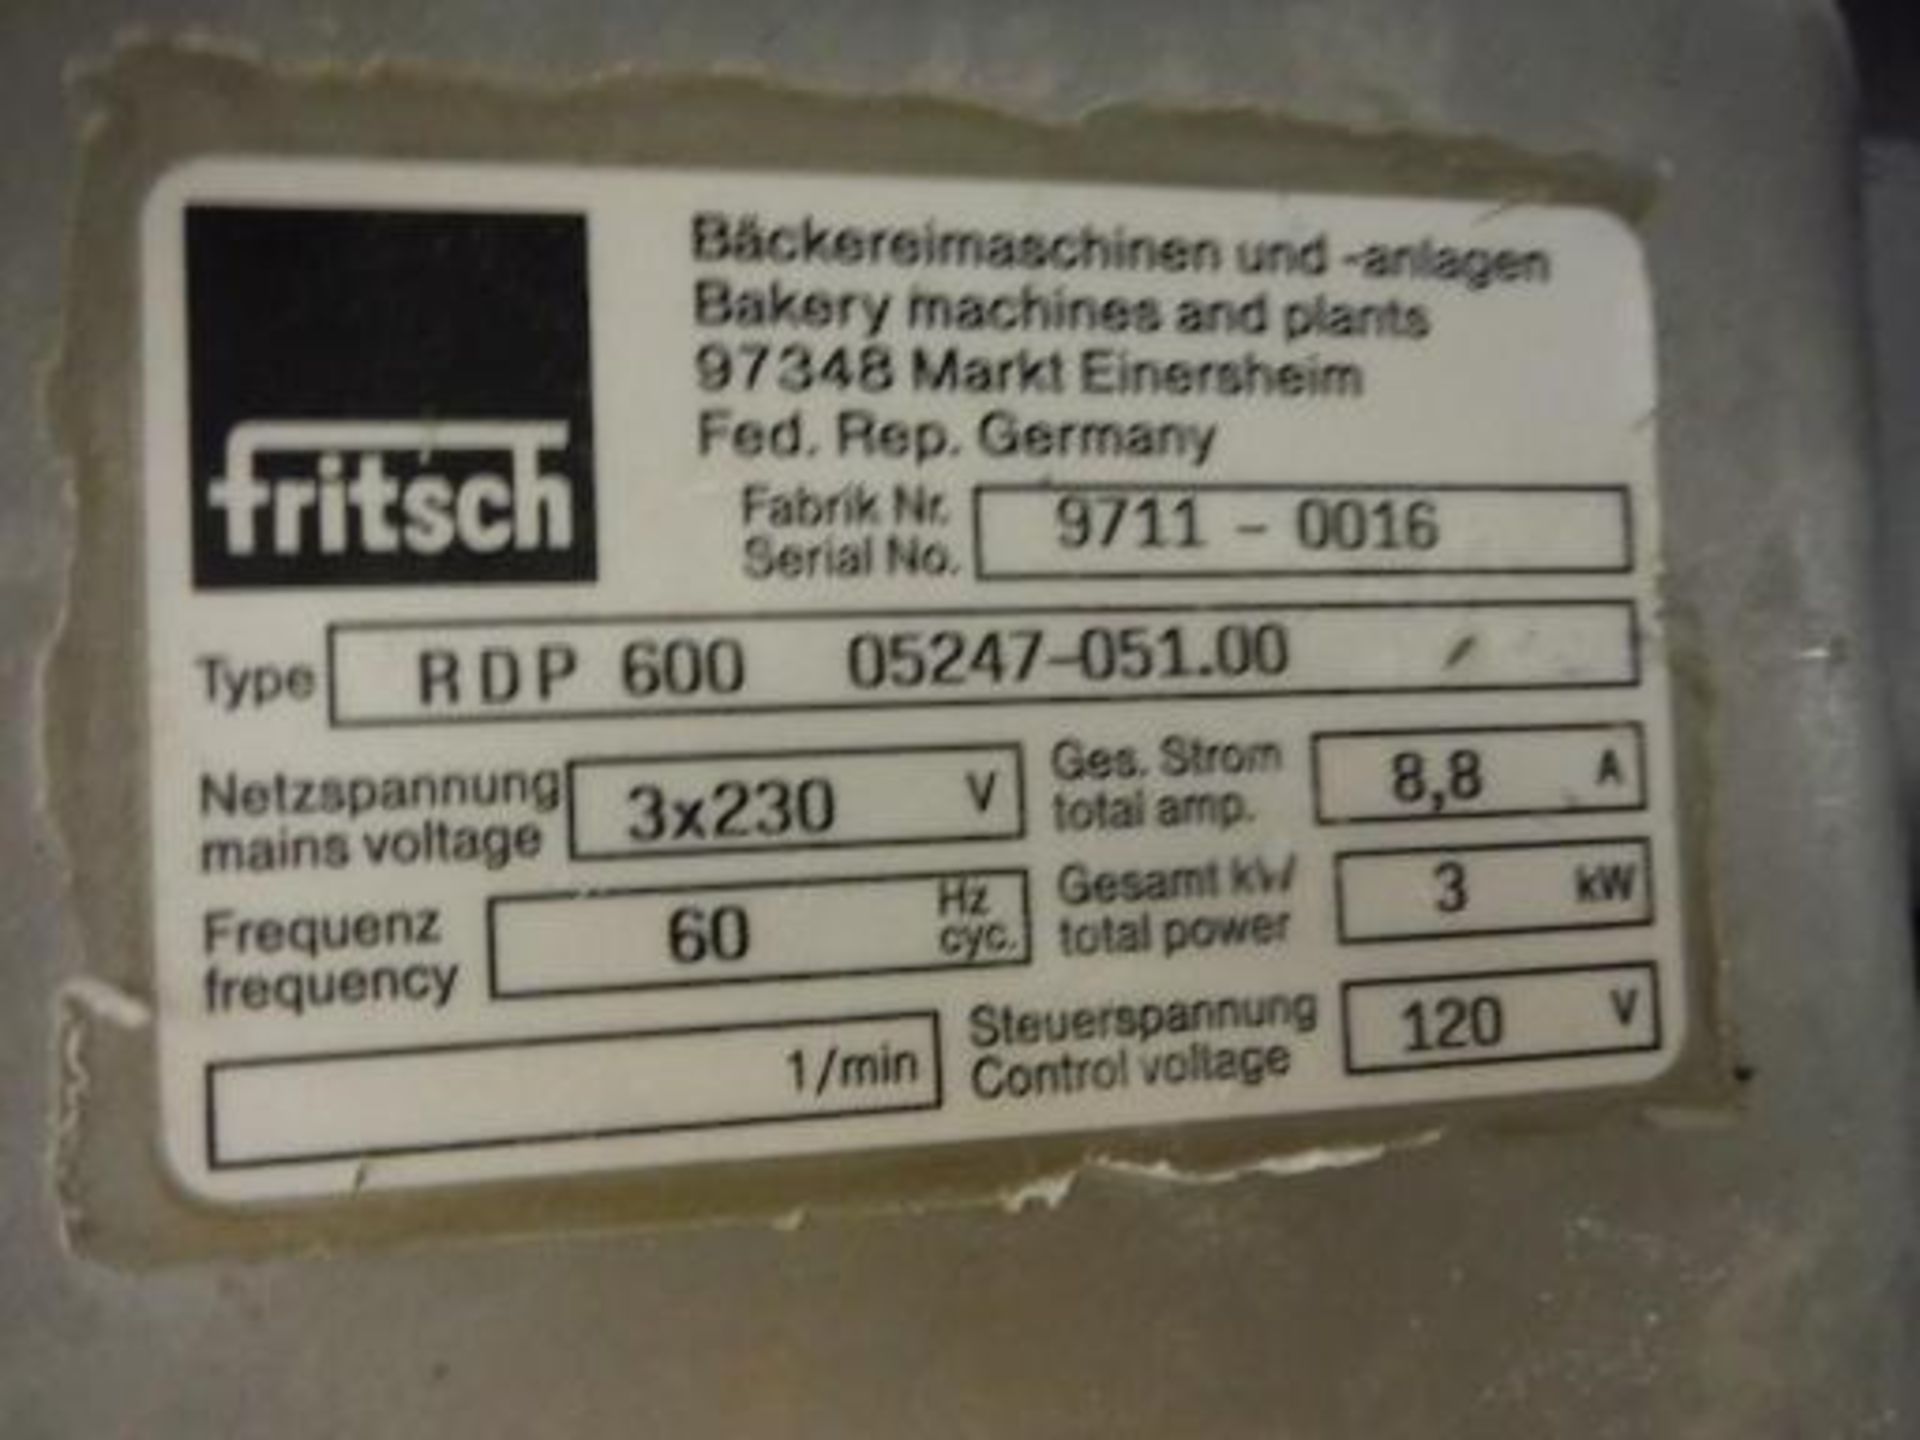 Fritsch 3 roll extruder, Model RDP 600 05247-051.00, SN 9711-0016, approx. 26 in. wide rolls, - Image 3 of 6